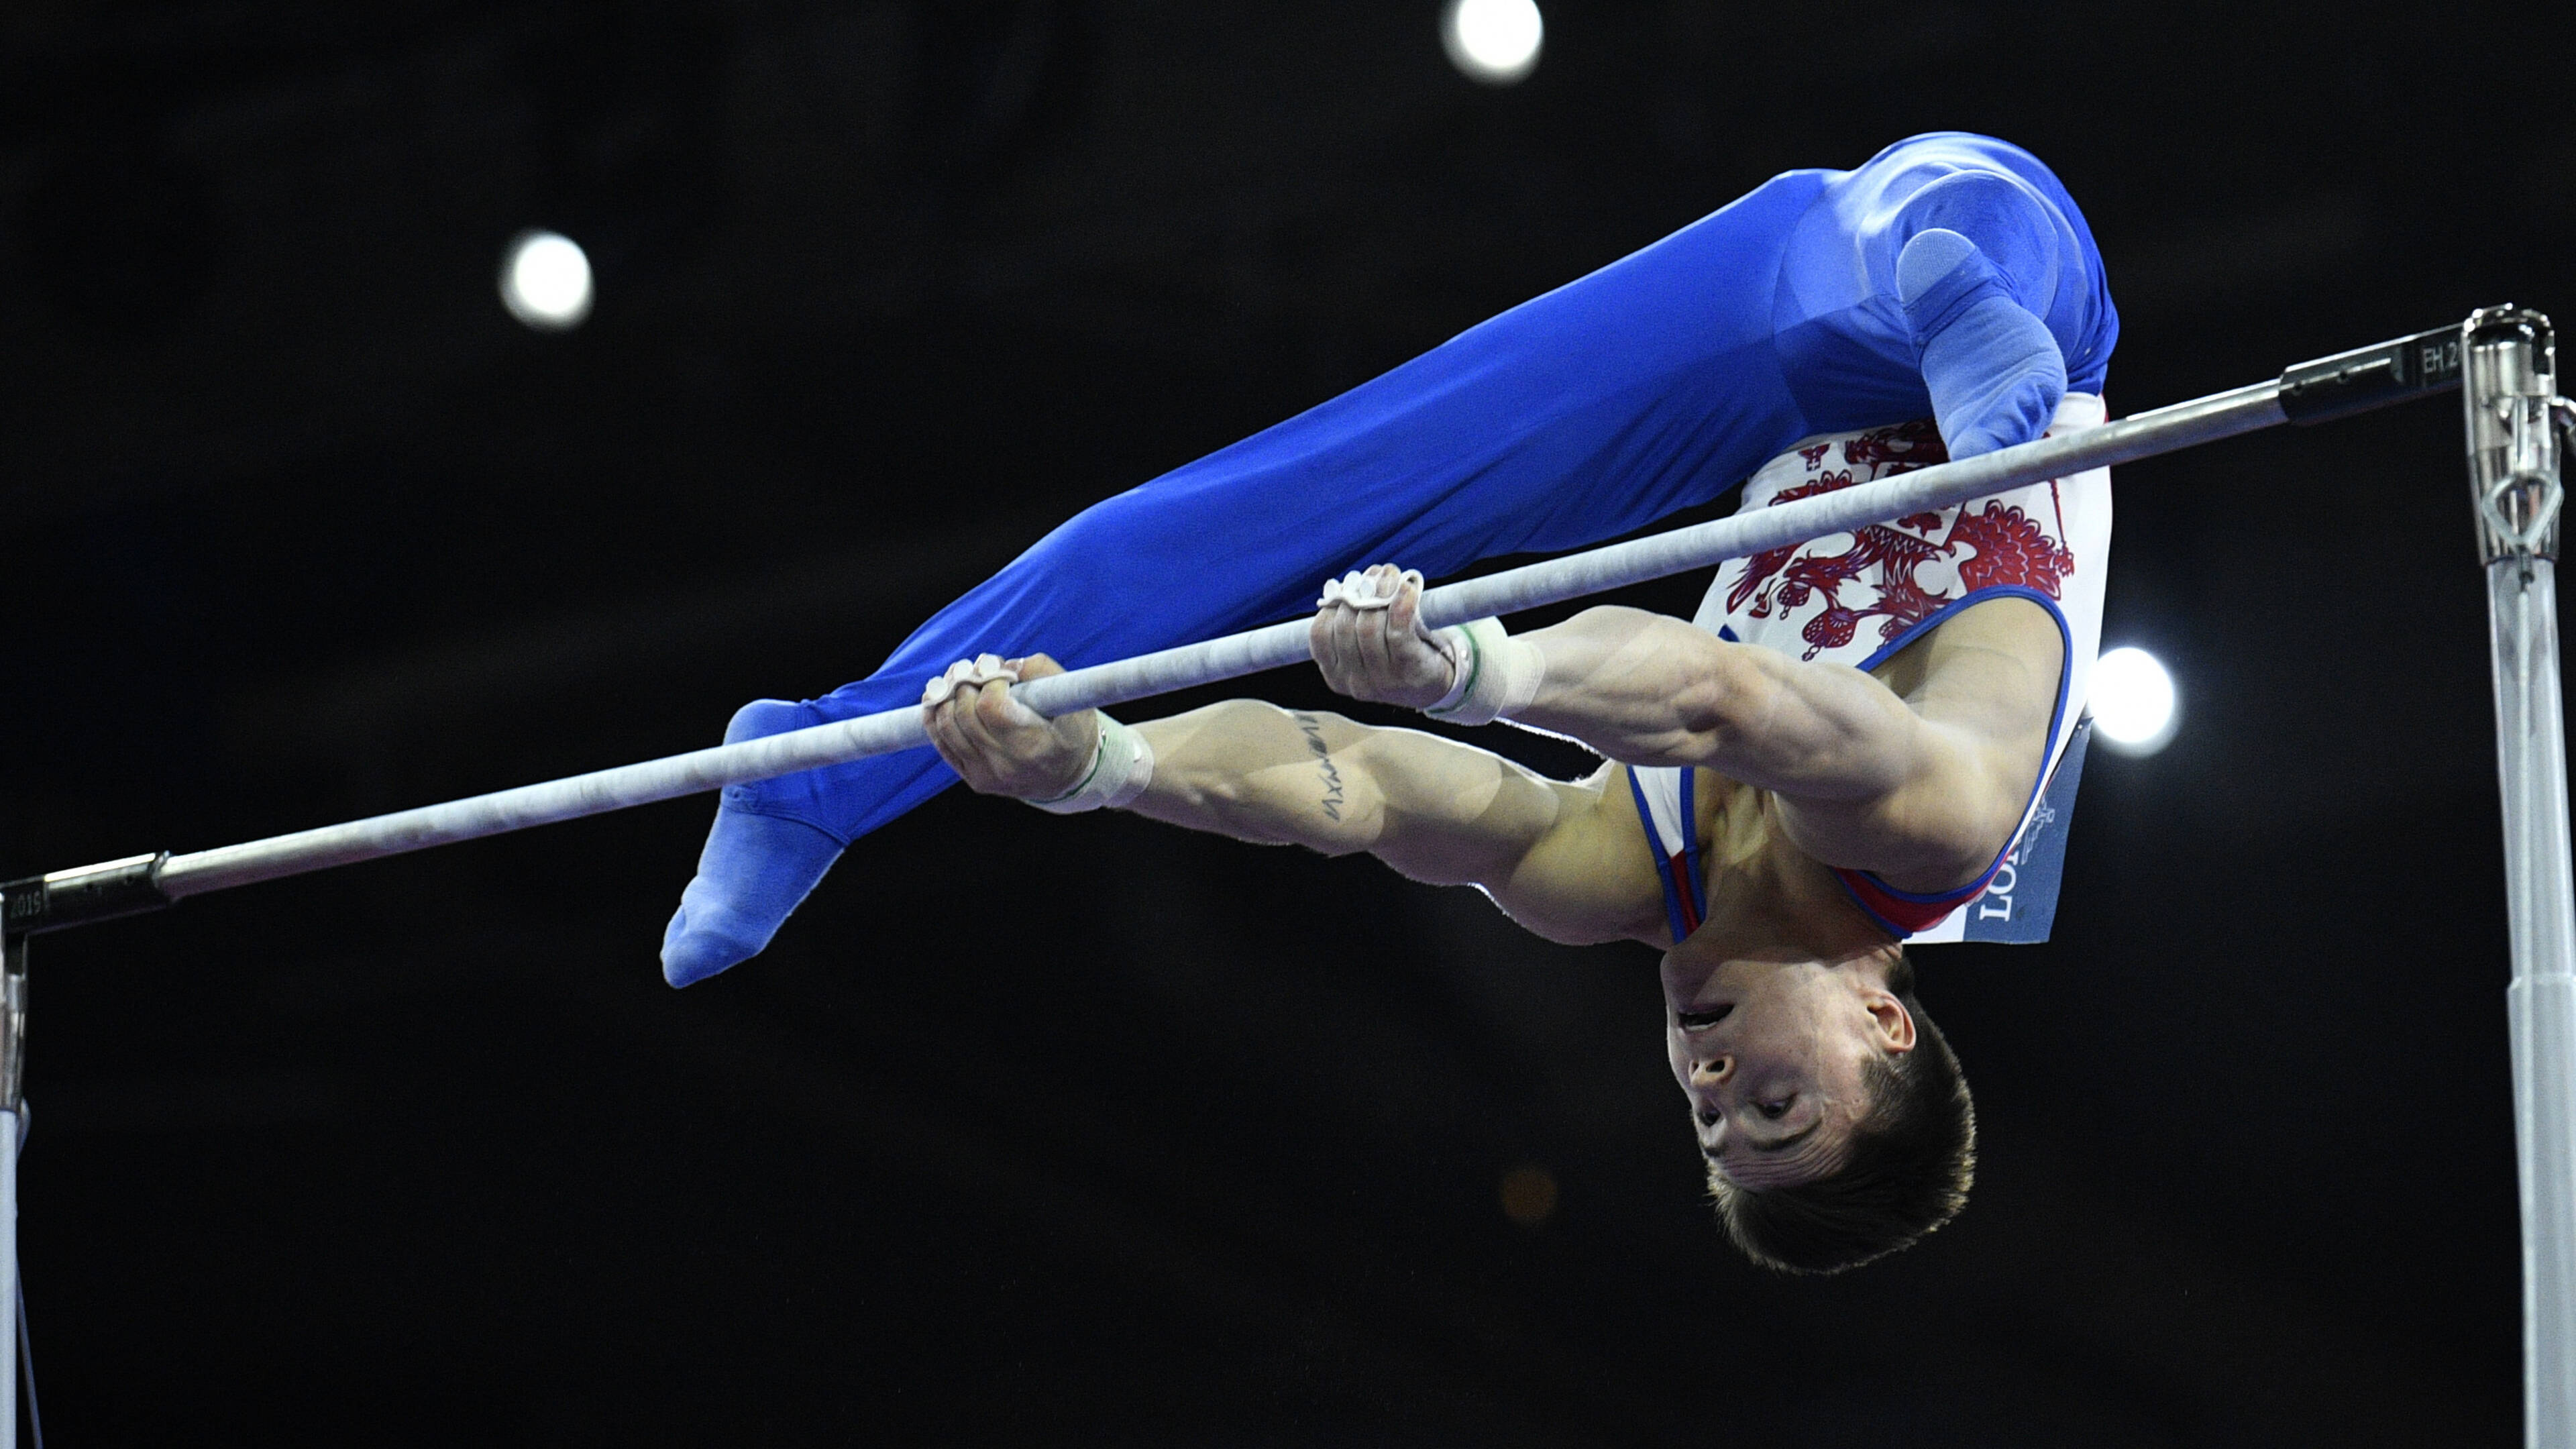 Horizontal Bar: Gold and silver for Russia in the all-around final, Athletics Equipment, Nikita Nagorny wins in Stuttgart, 2019 World Artistic Gymnastics Championships. 3840x2160 4K Background.